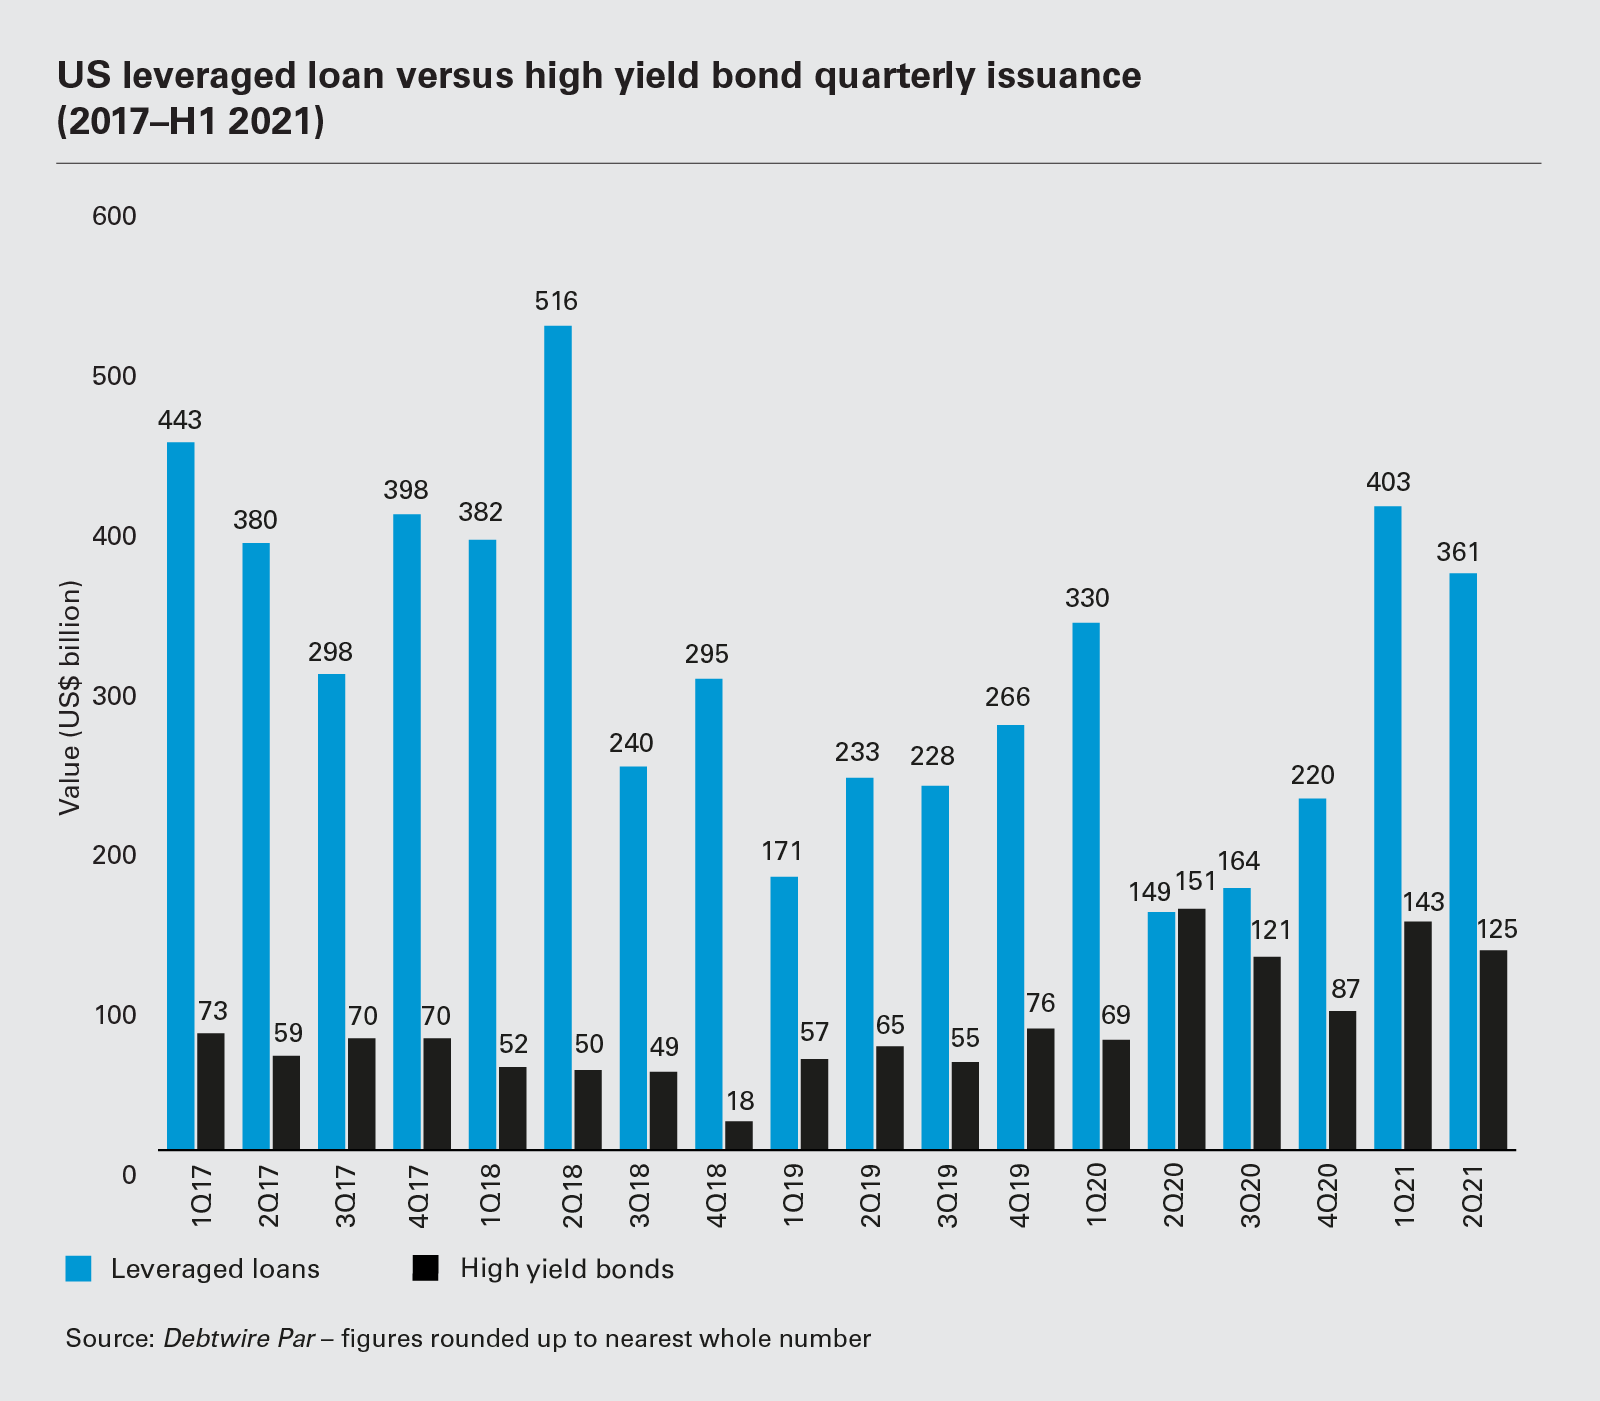 US leveraged loan versus high yield bond quarterly issuance (H1 2021)